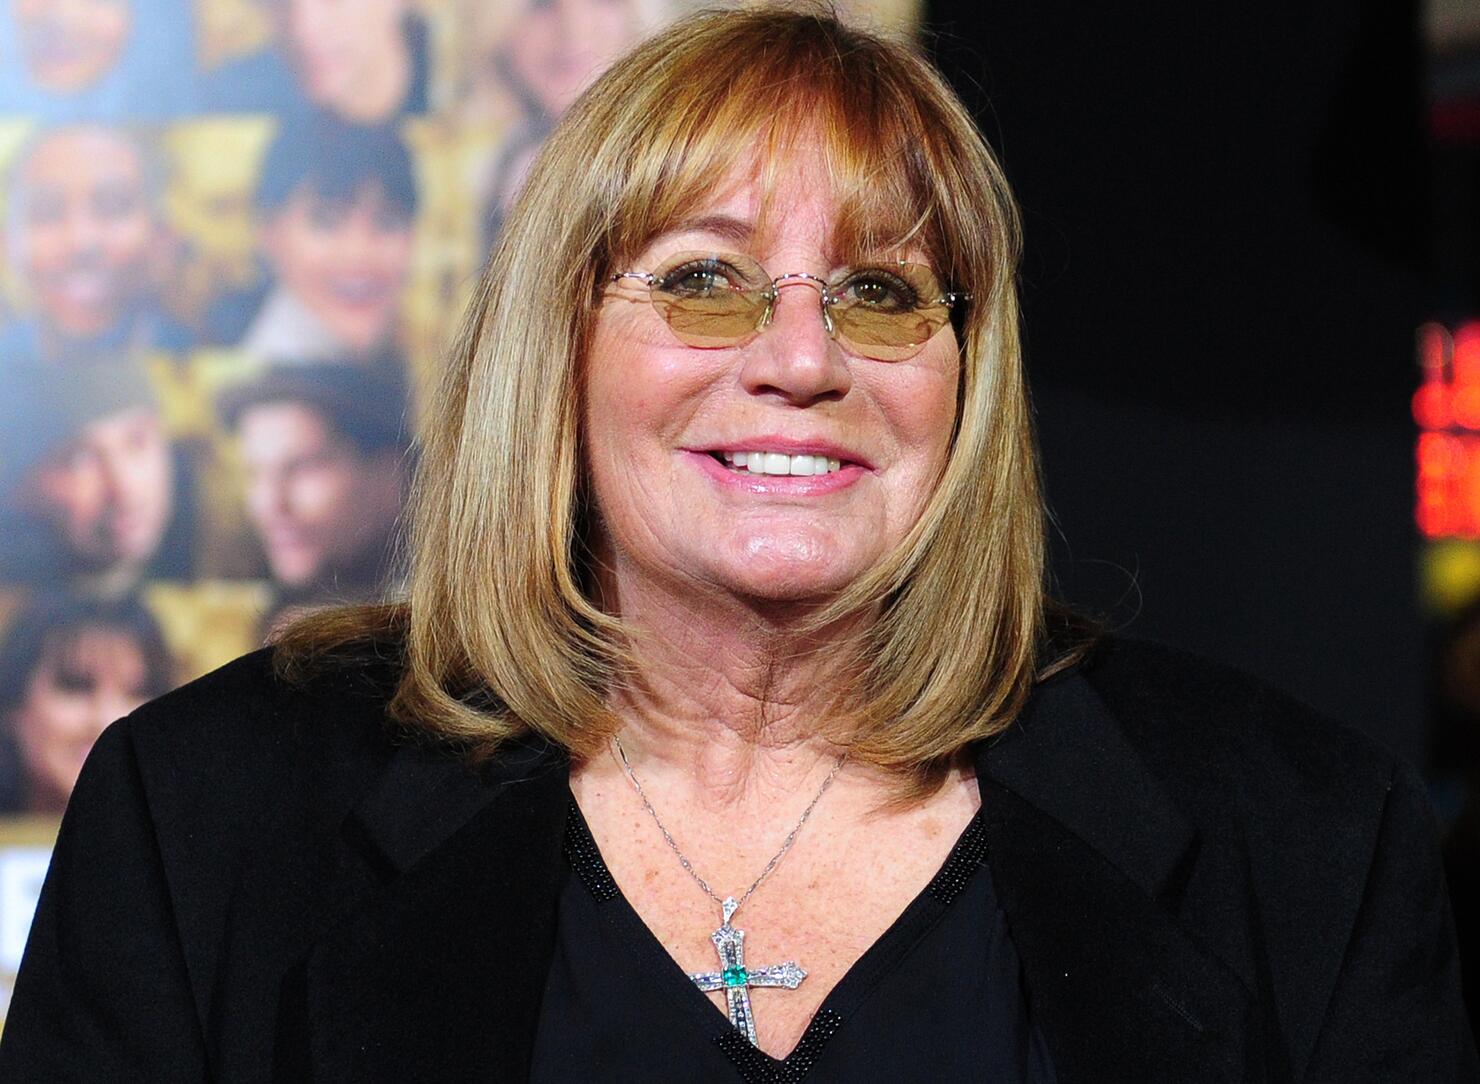 Penny Marshall passes away from complications due to diabetes